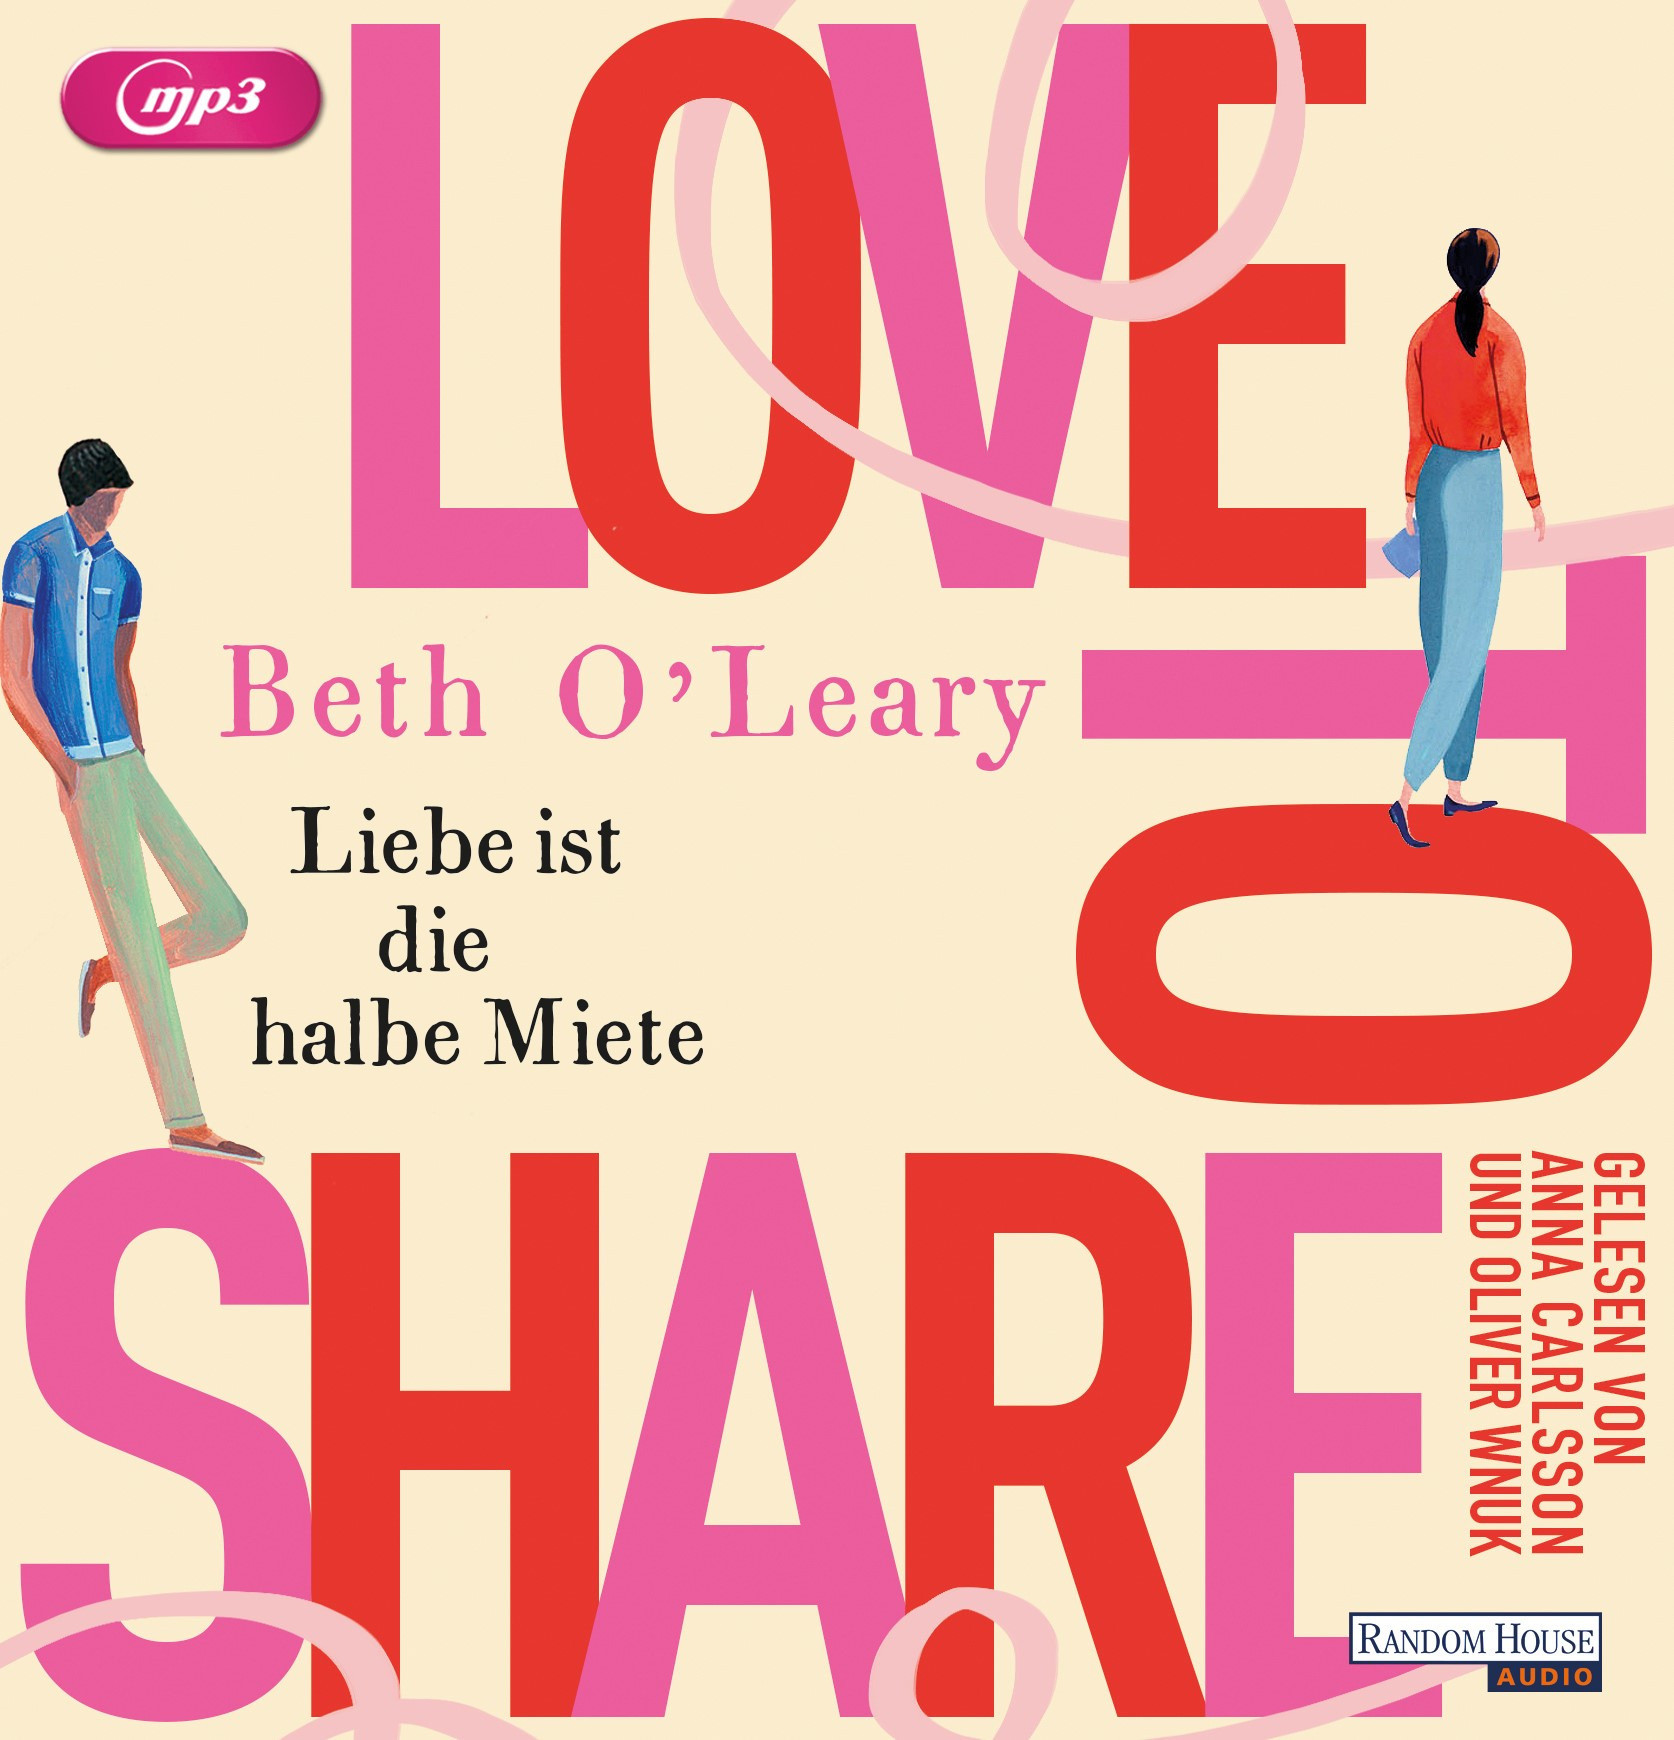 Beth O'Leary - Love to share